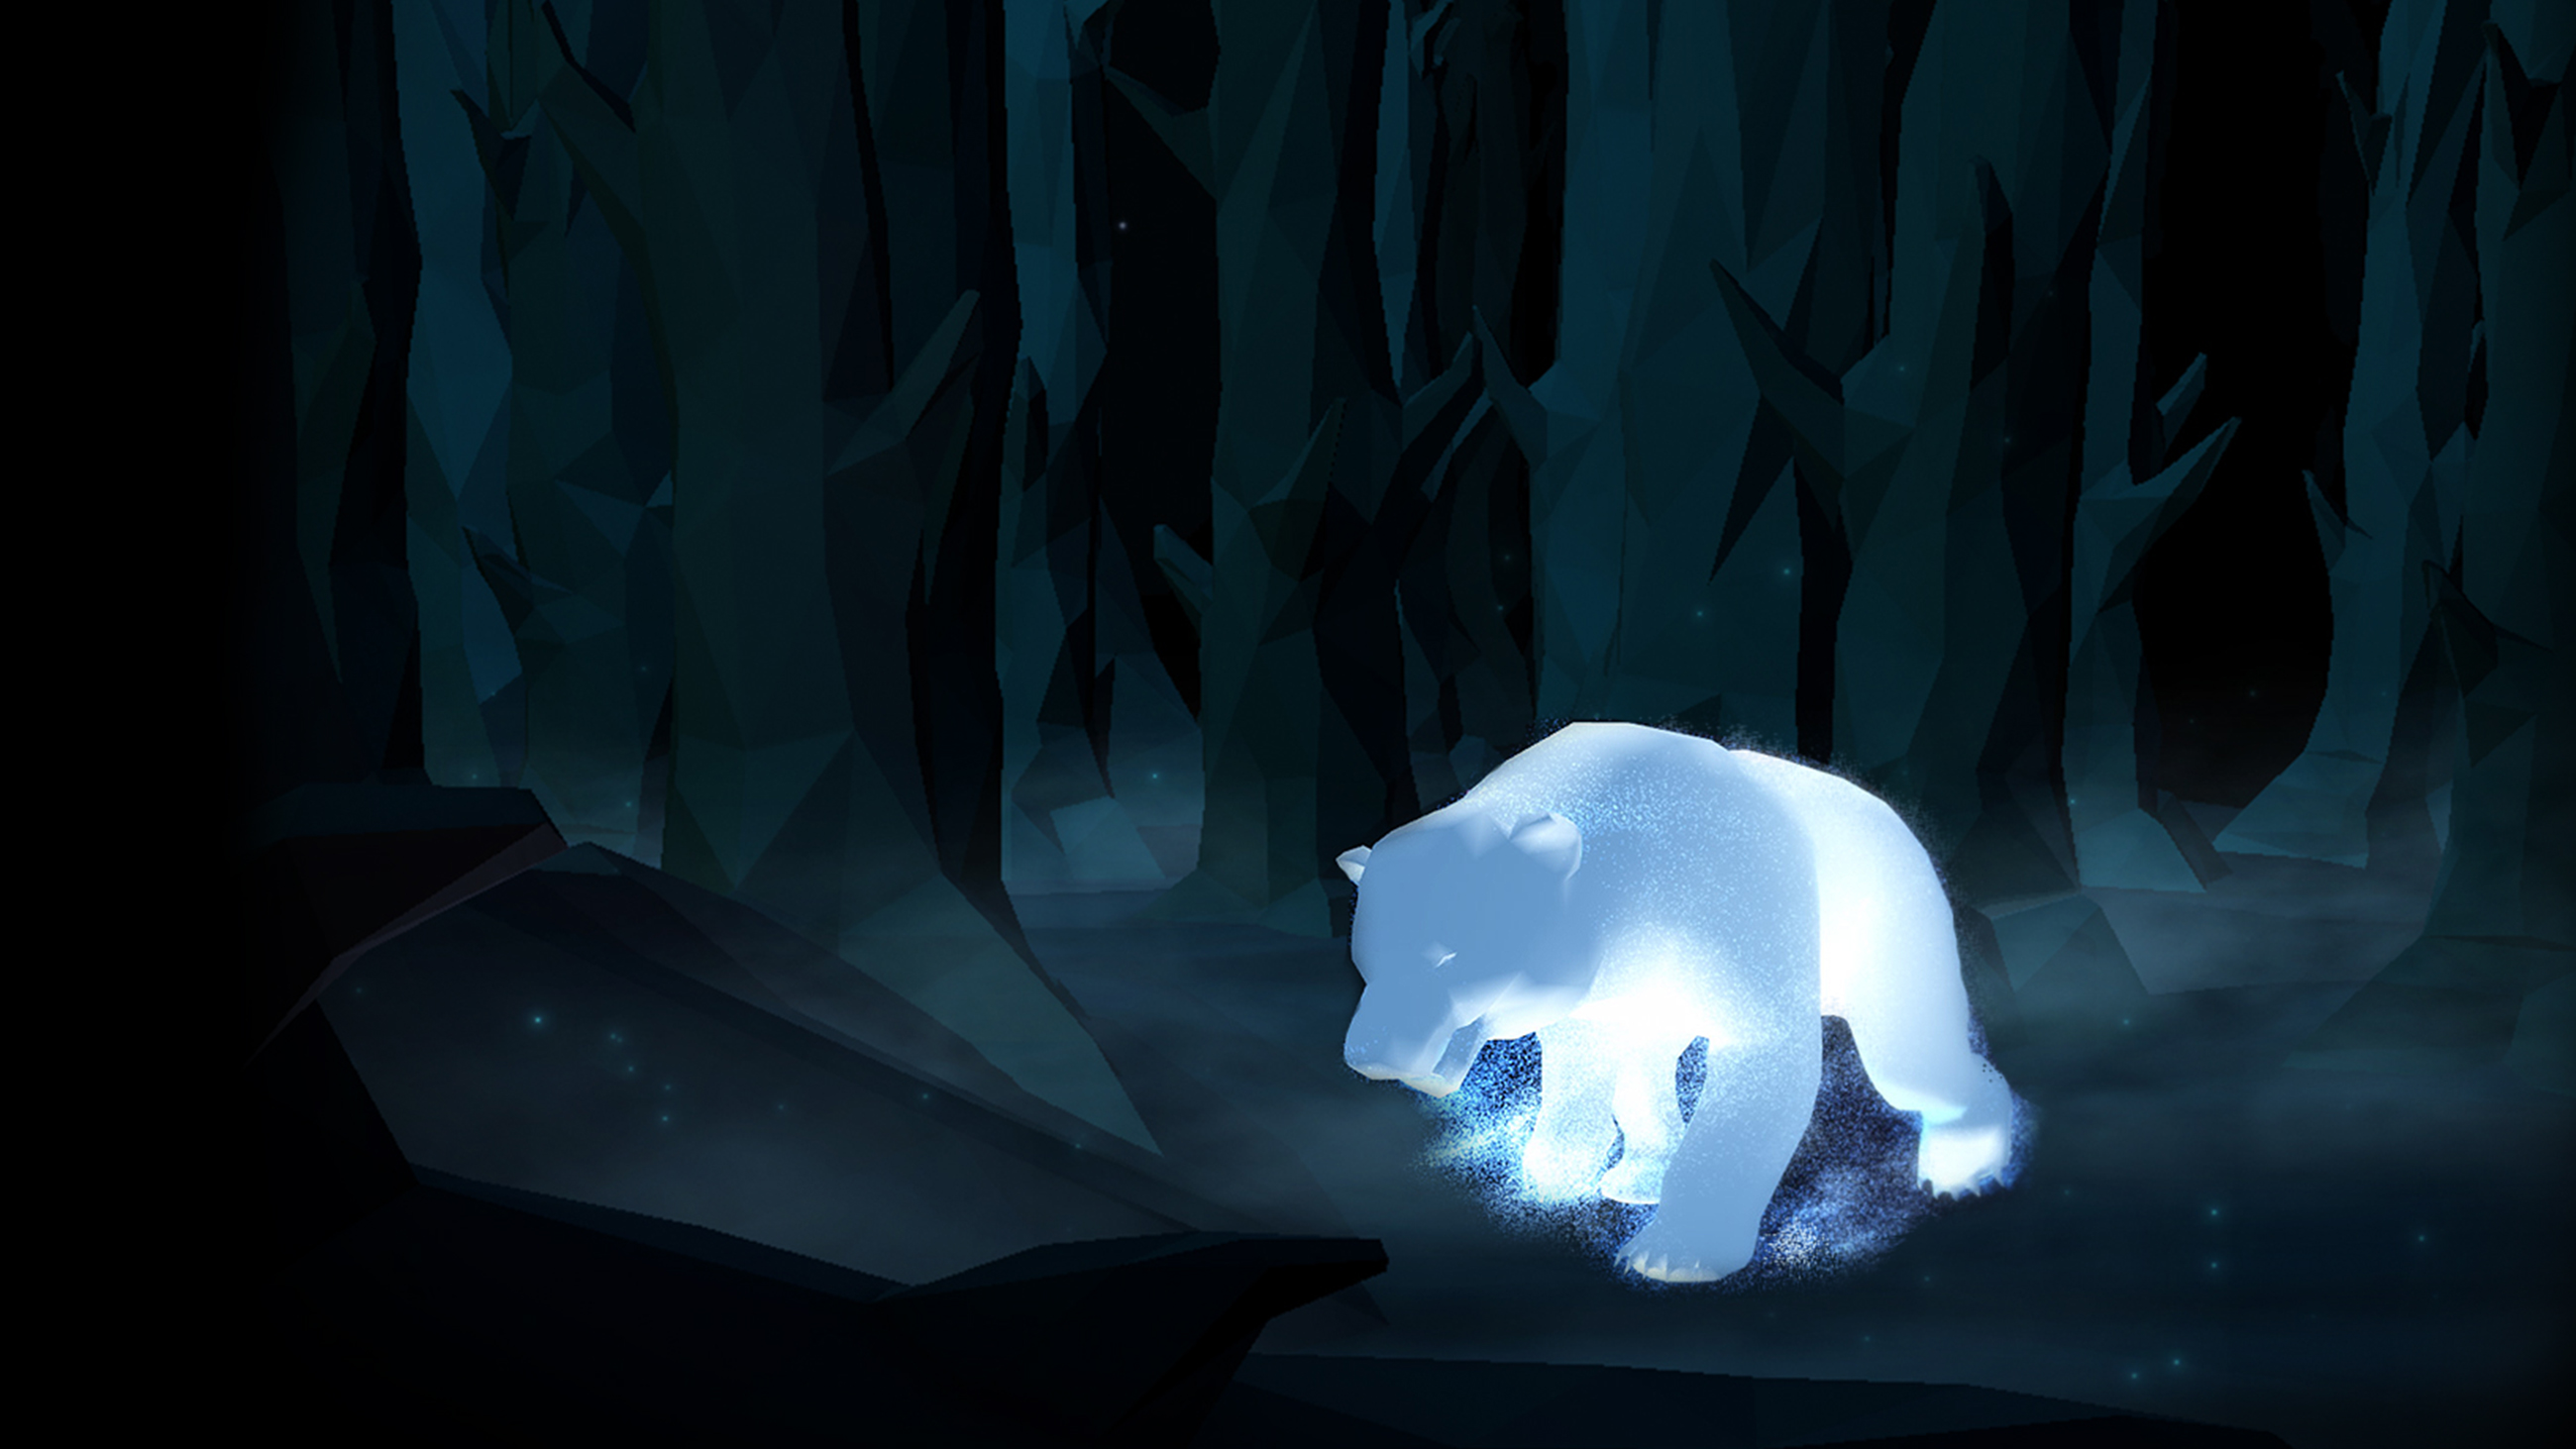 Discover your Patronus on Pottermore